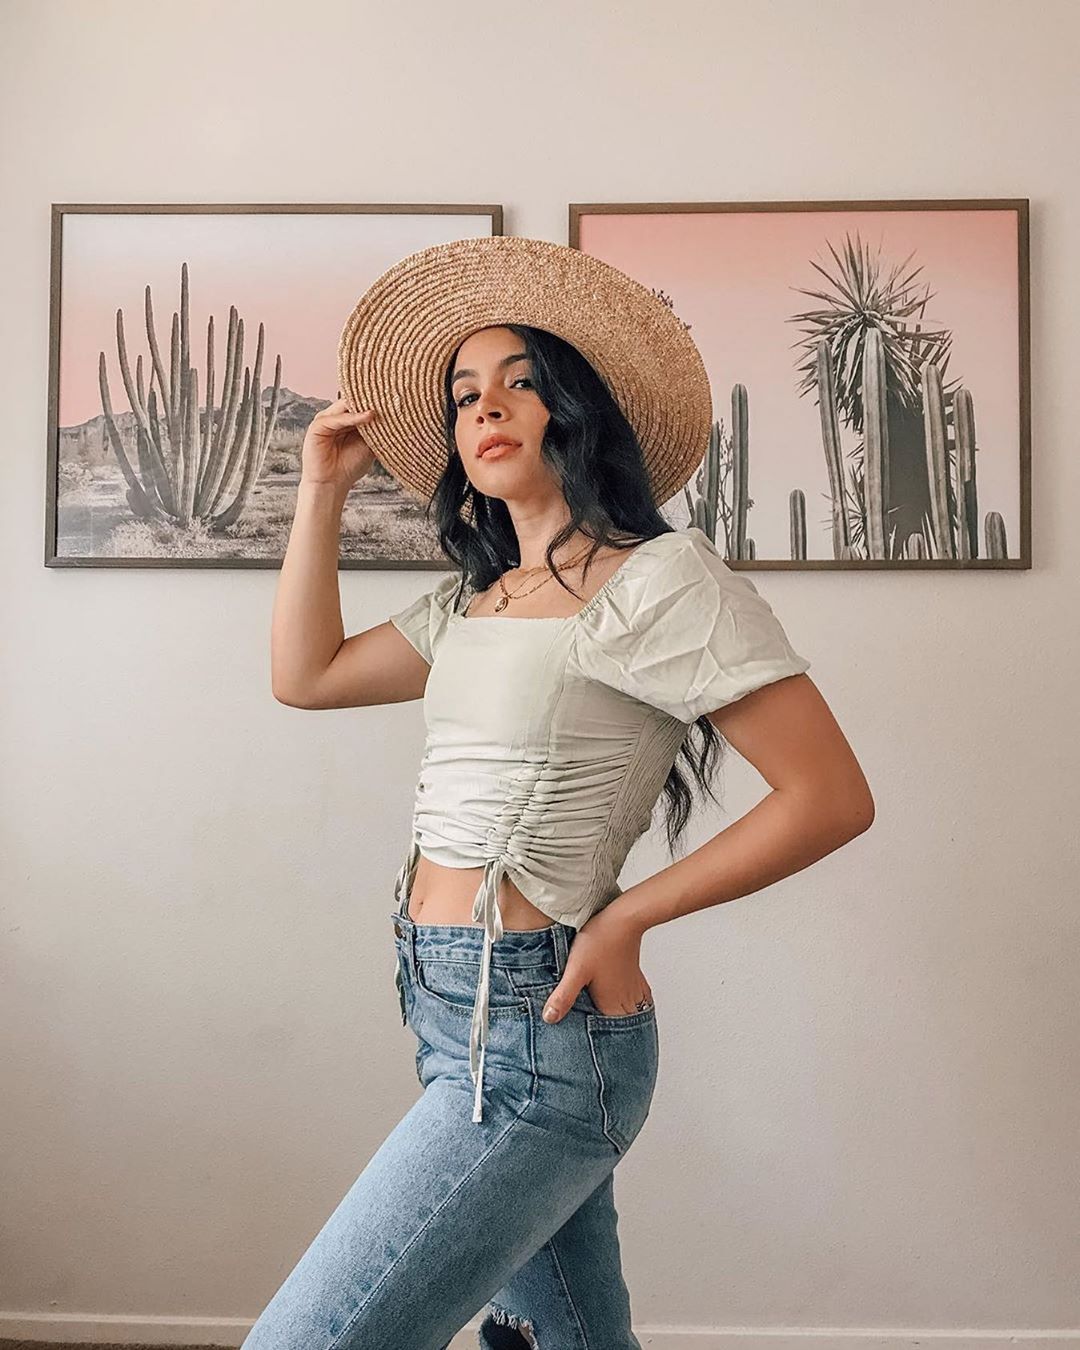 SHEIN.COM - Live for moments you can't put into words 👒 @jessicamelgoza_
ID:1146290,880943
#SHEIN #SHEINgals #SHEINstyle #SHEINss2020 #SHEINsummerfun #knot